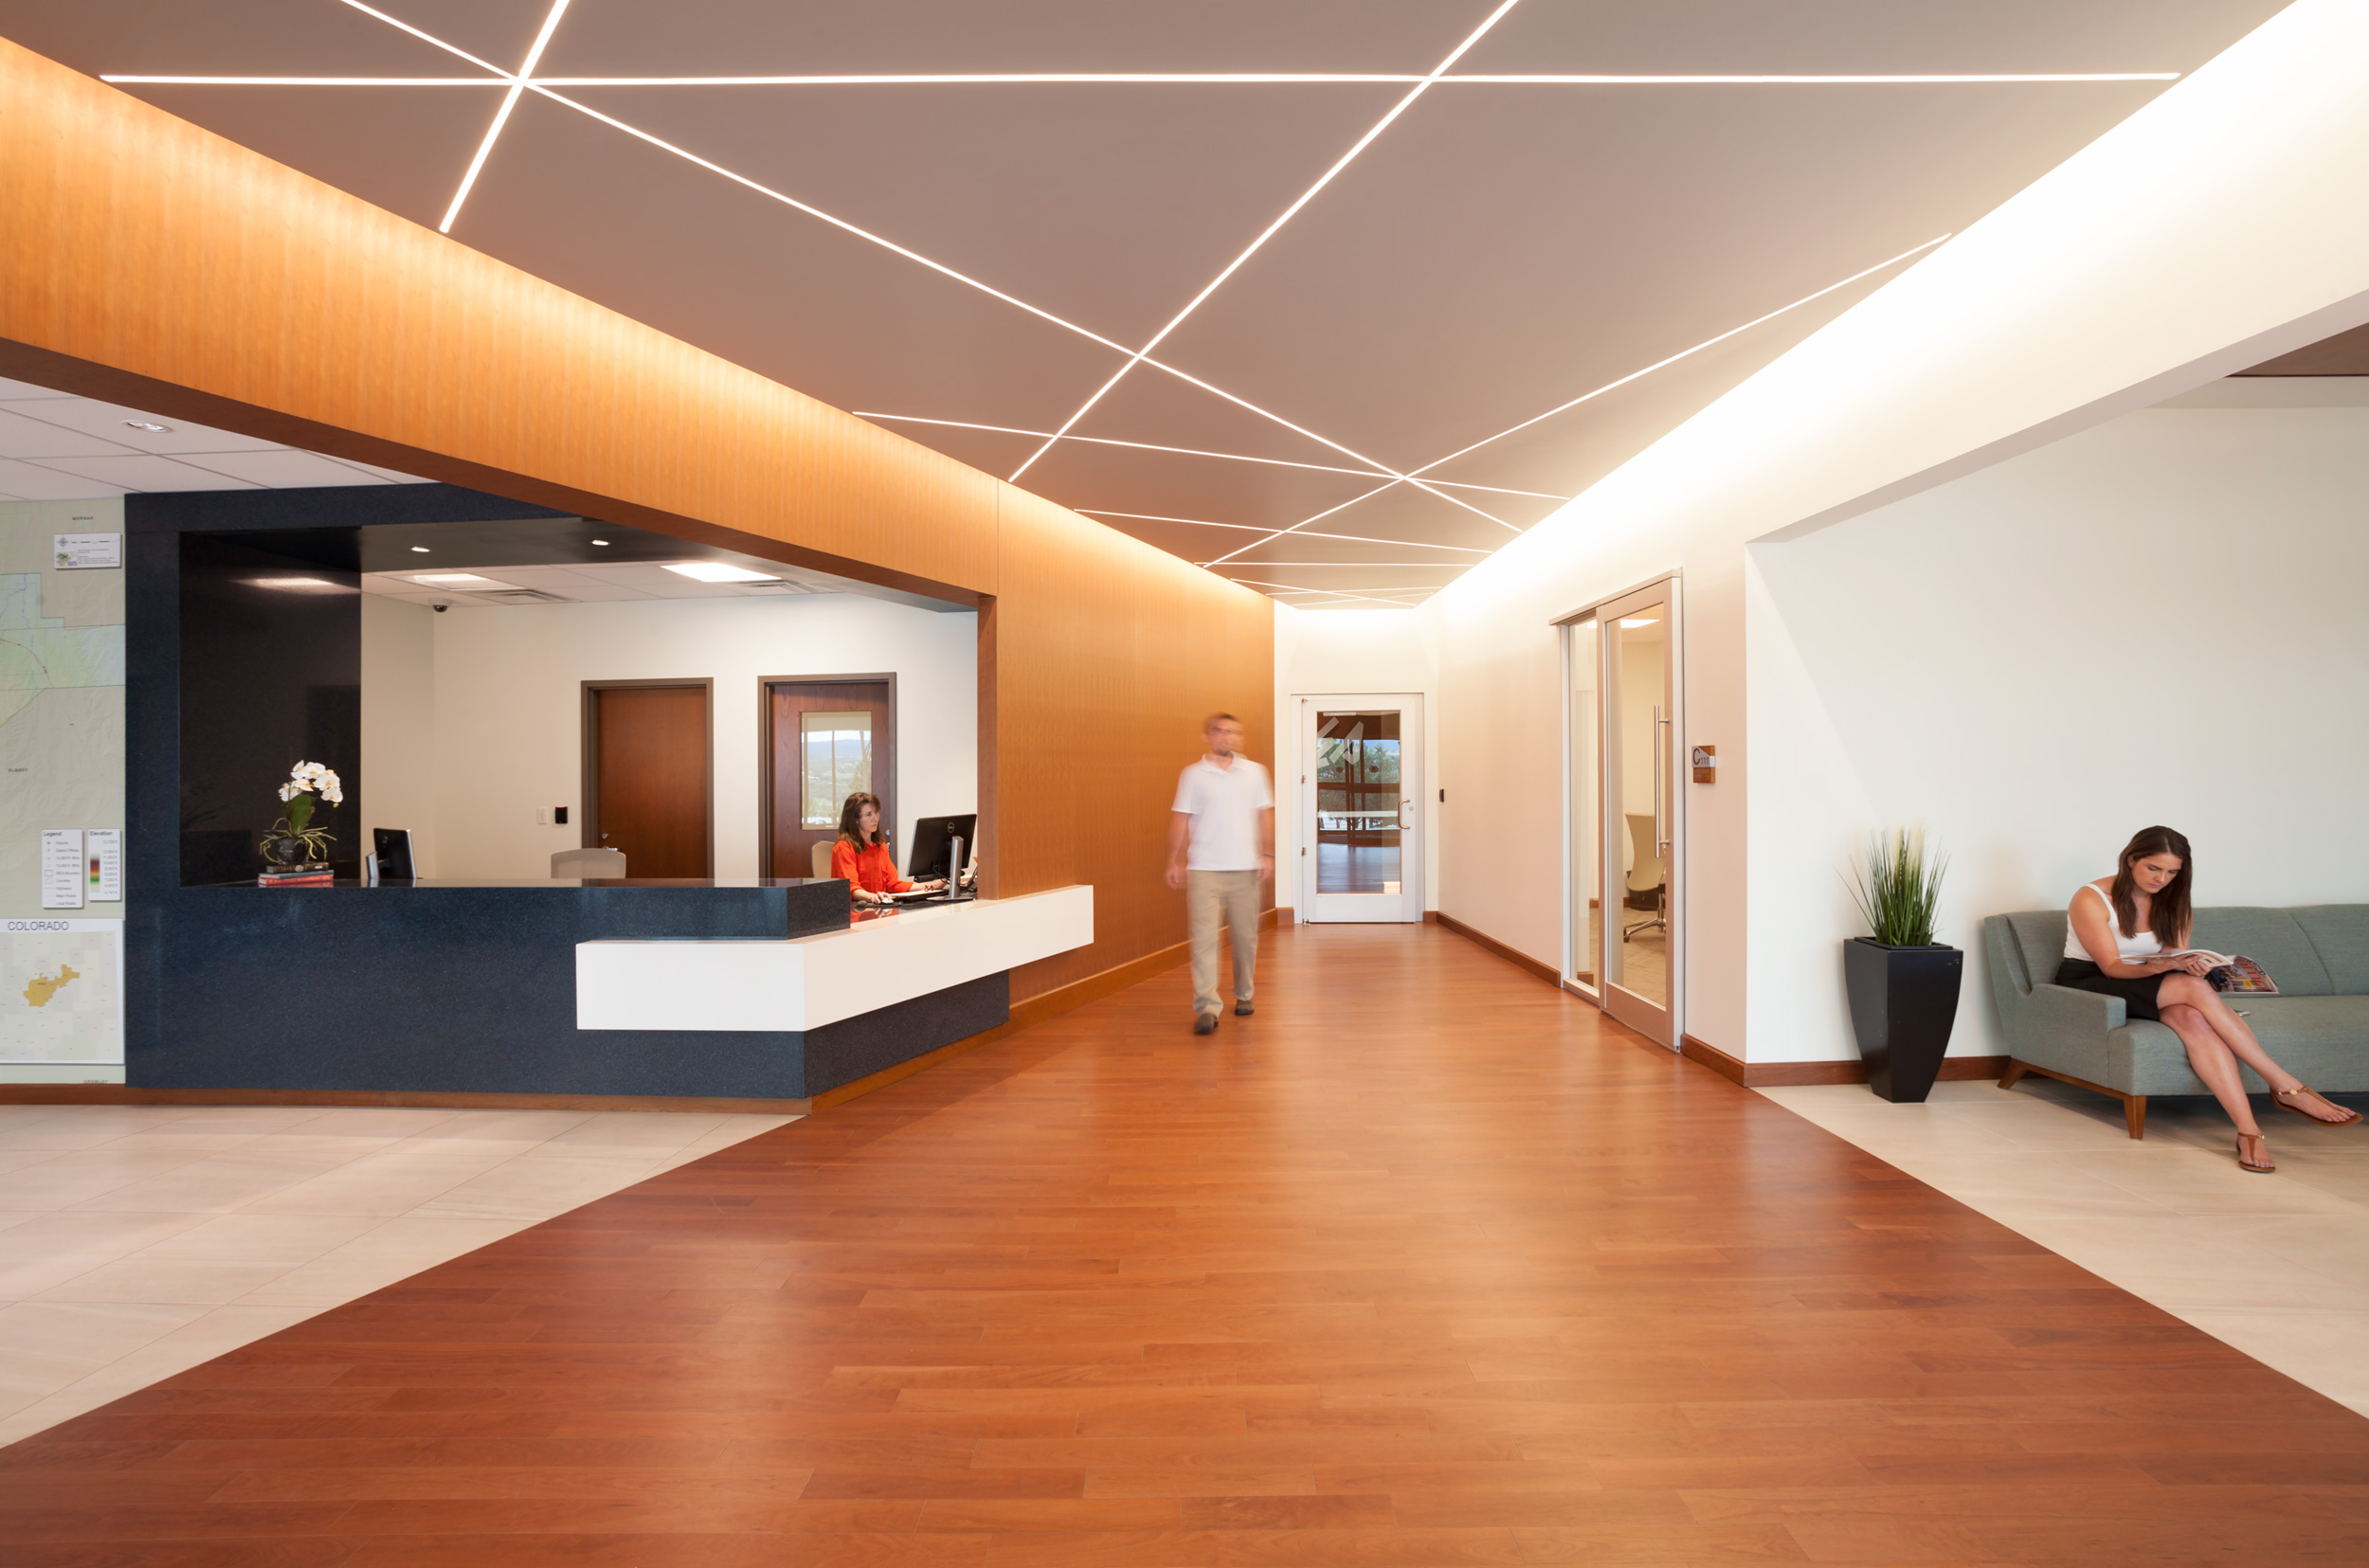 Commercial lobby image of Intermountain Rural Electric Association Headquarters in Sedalia, CO